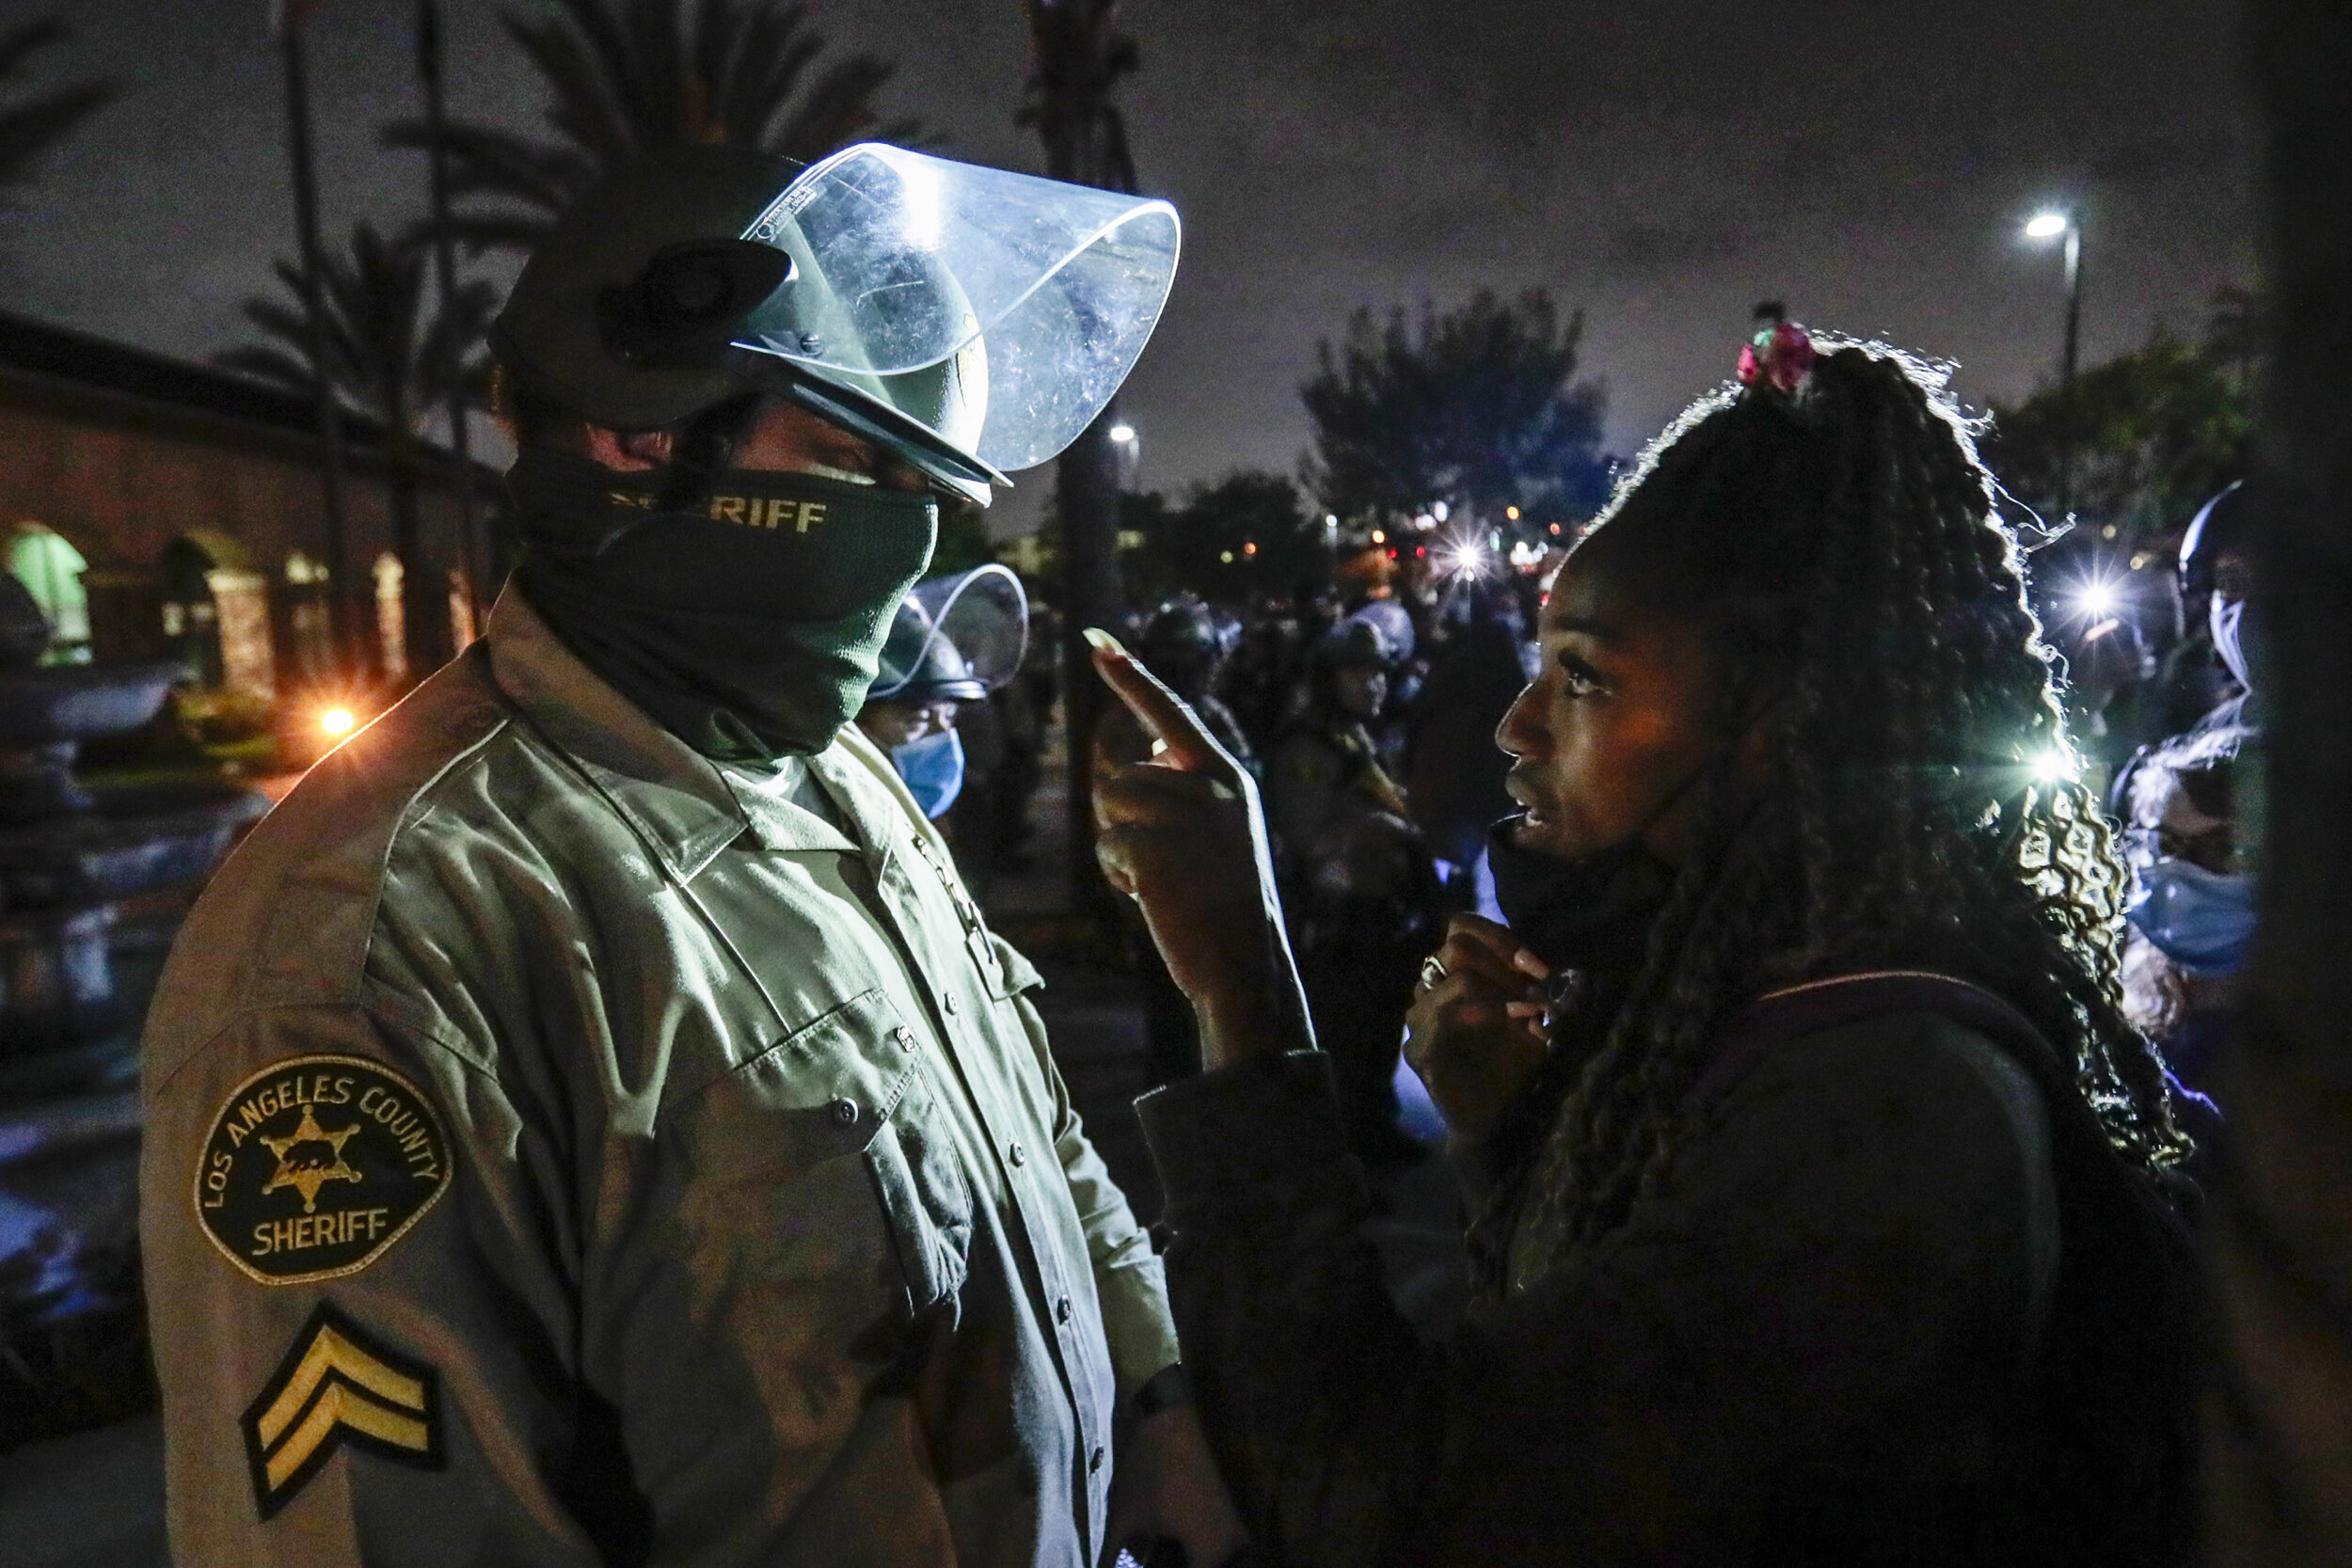  Black Lives Matters protesters demonstrate at the South LA Sheriff’s Station hours after Dijon Kizzee was shot to death by deputies, August 31. Video shows Kizzee, who was stopped by deputies while riding a bicycle in a nearby neighborhood, was shot